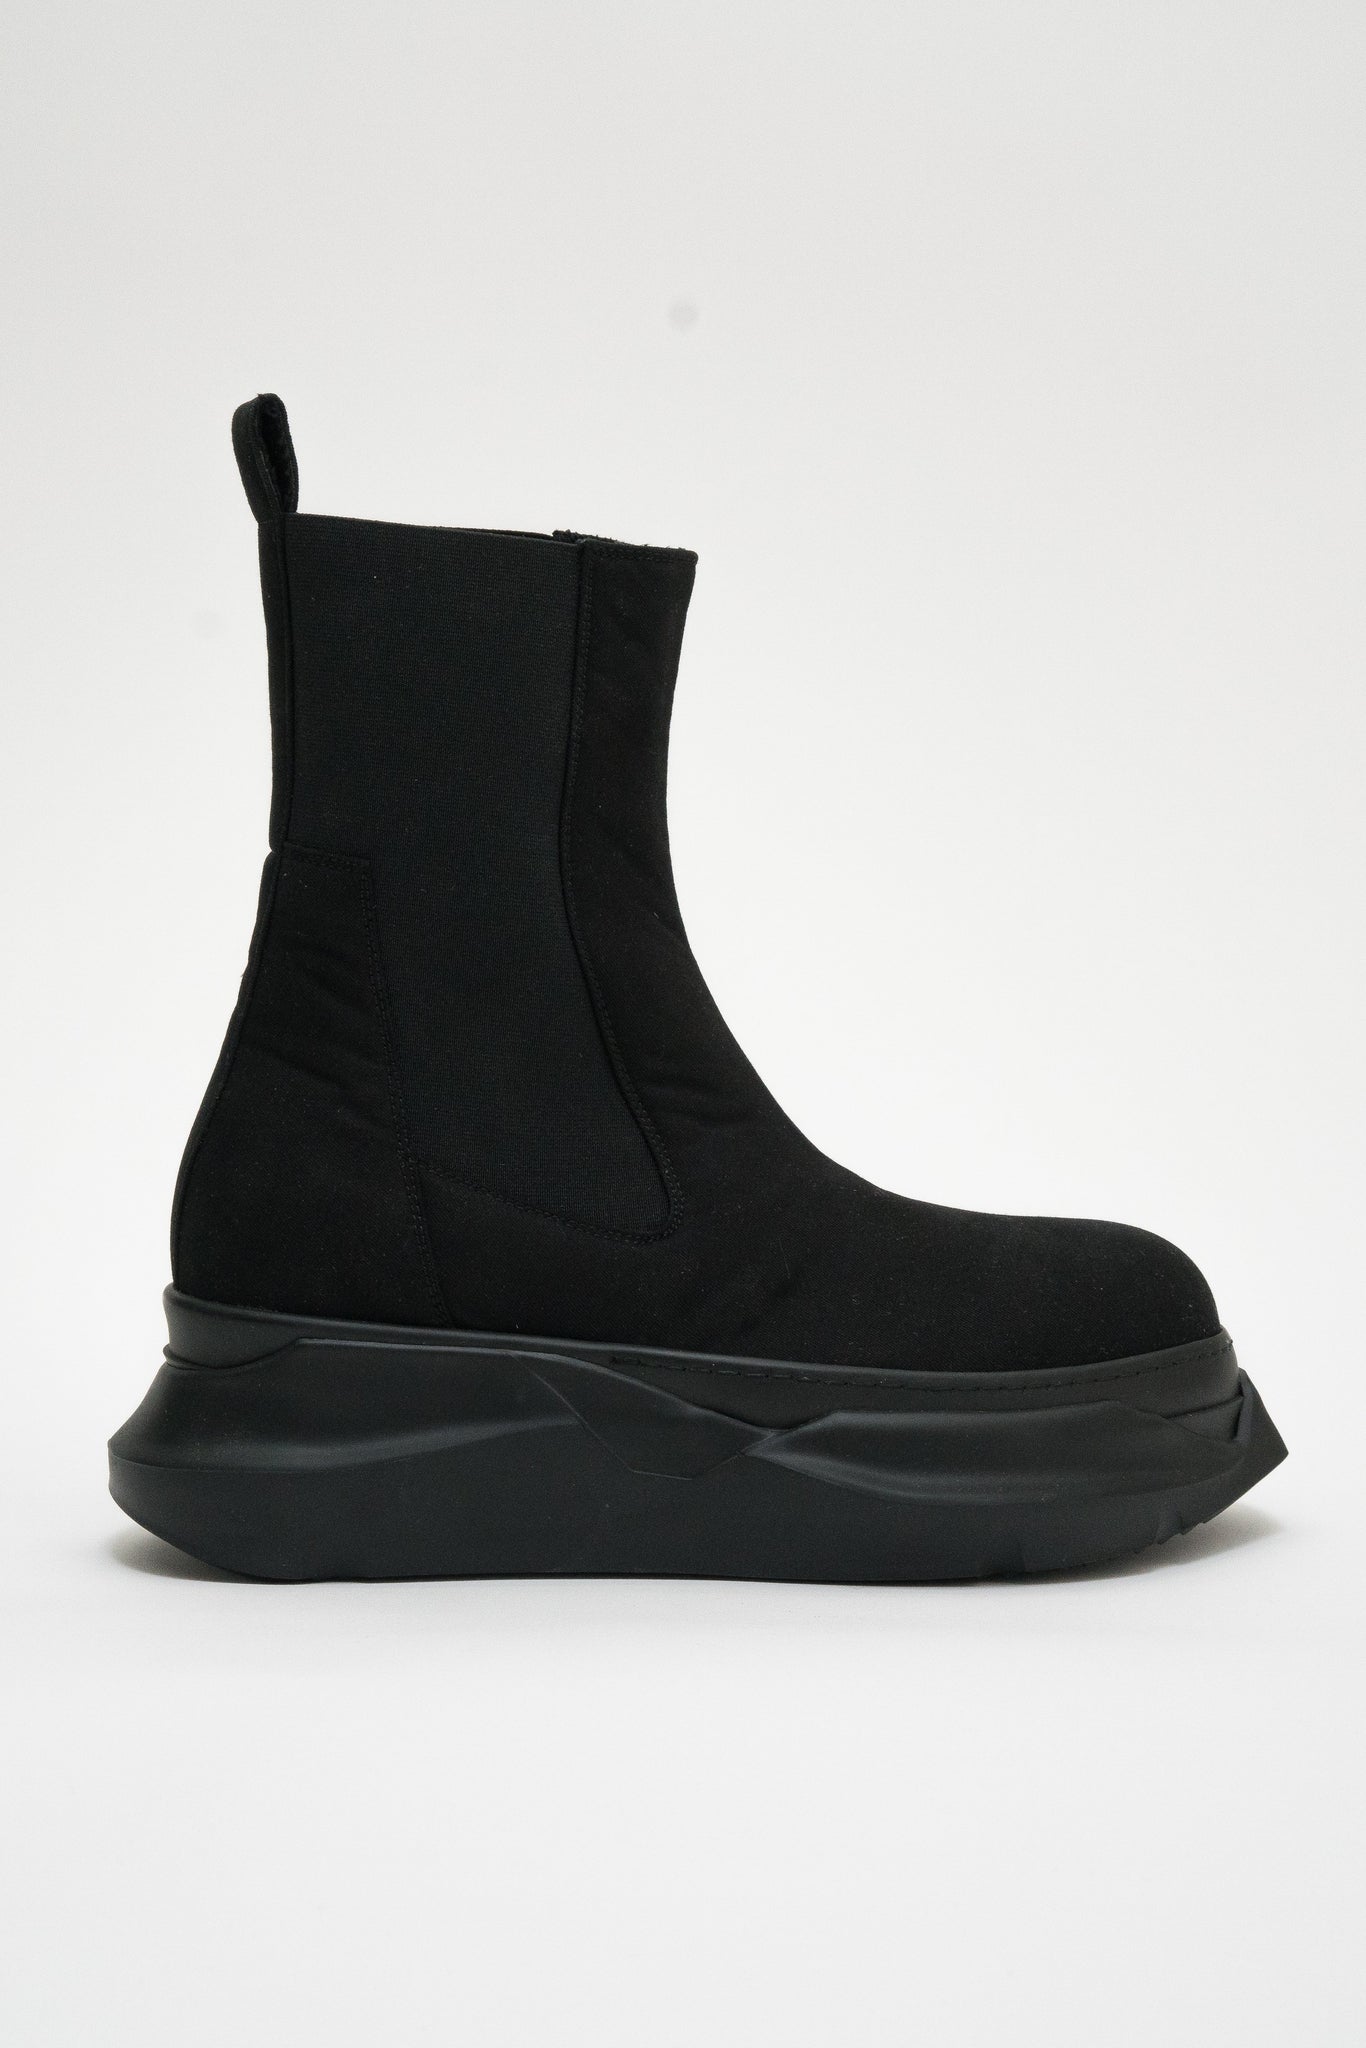 Rick Owens DRKSHDW Abstract Beatle boots - Black